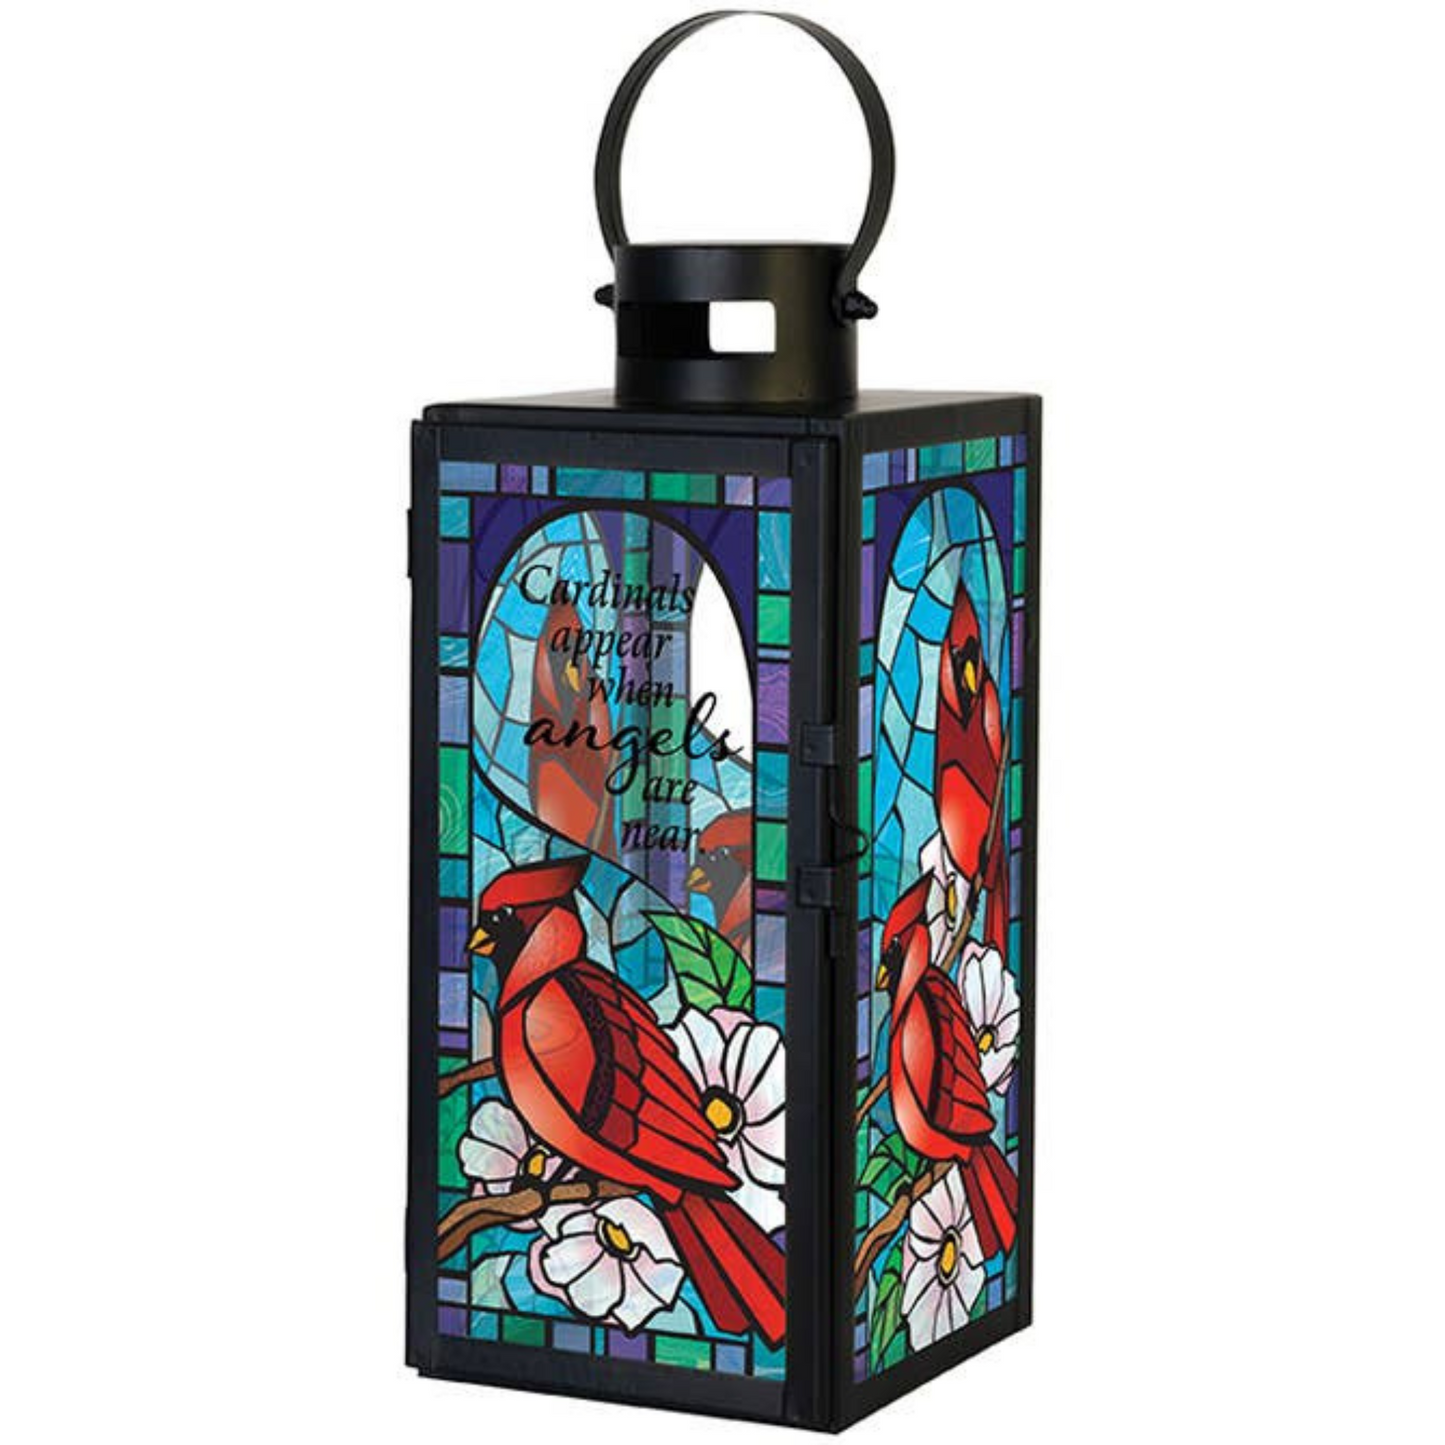 "Cardinals Appear" Stained Glass Lantern